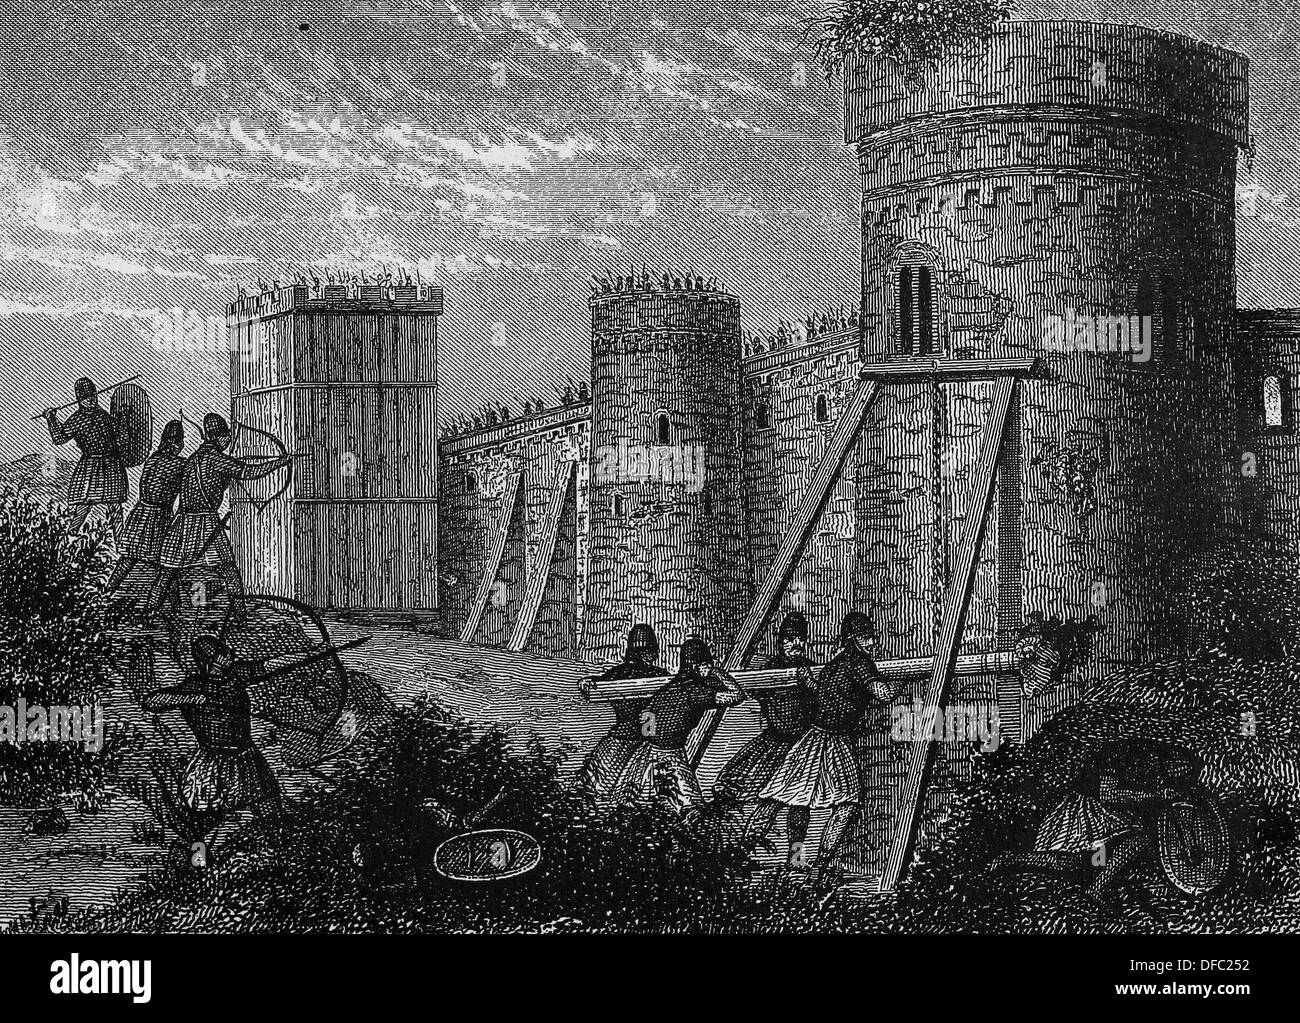 Roman Empire. Siege engine. Battering ram. Engraving. Iconographic Enclyclopaedia of science, Literature and Art. 19th century. Stock Photo